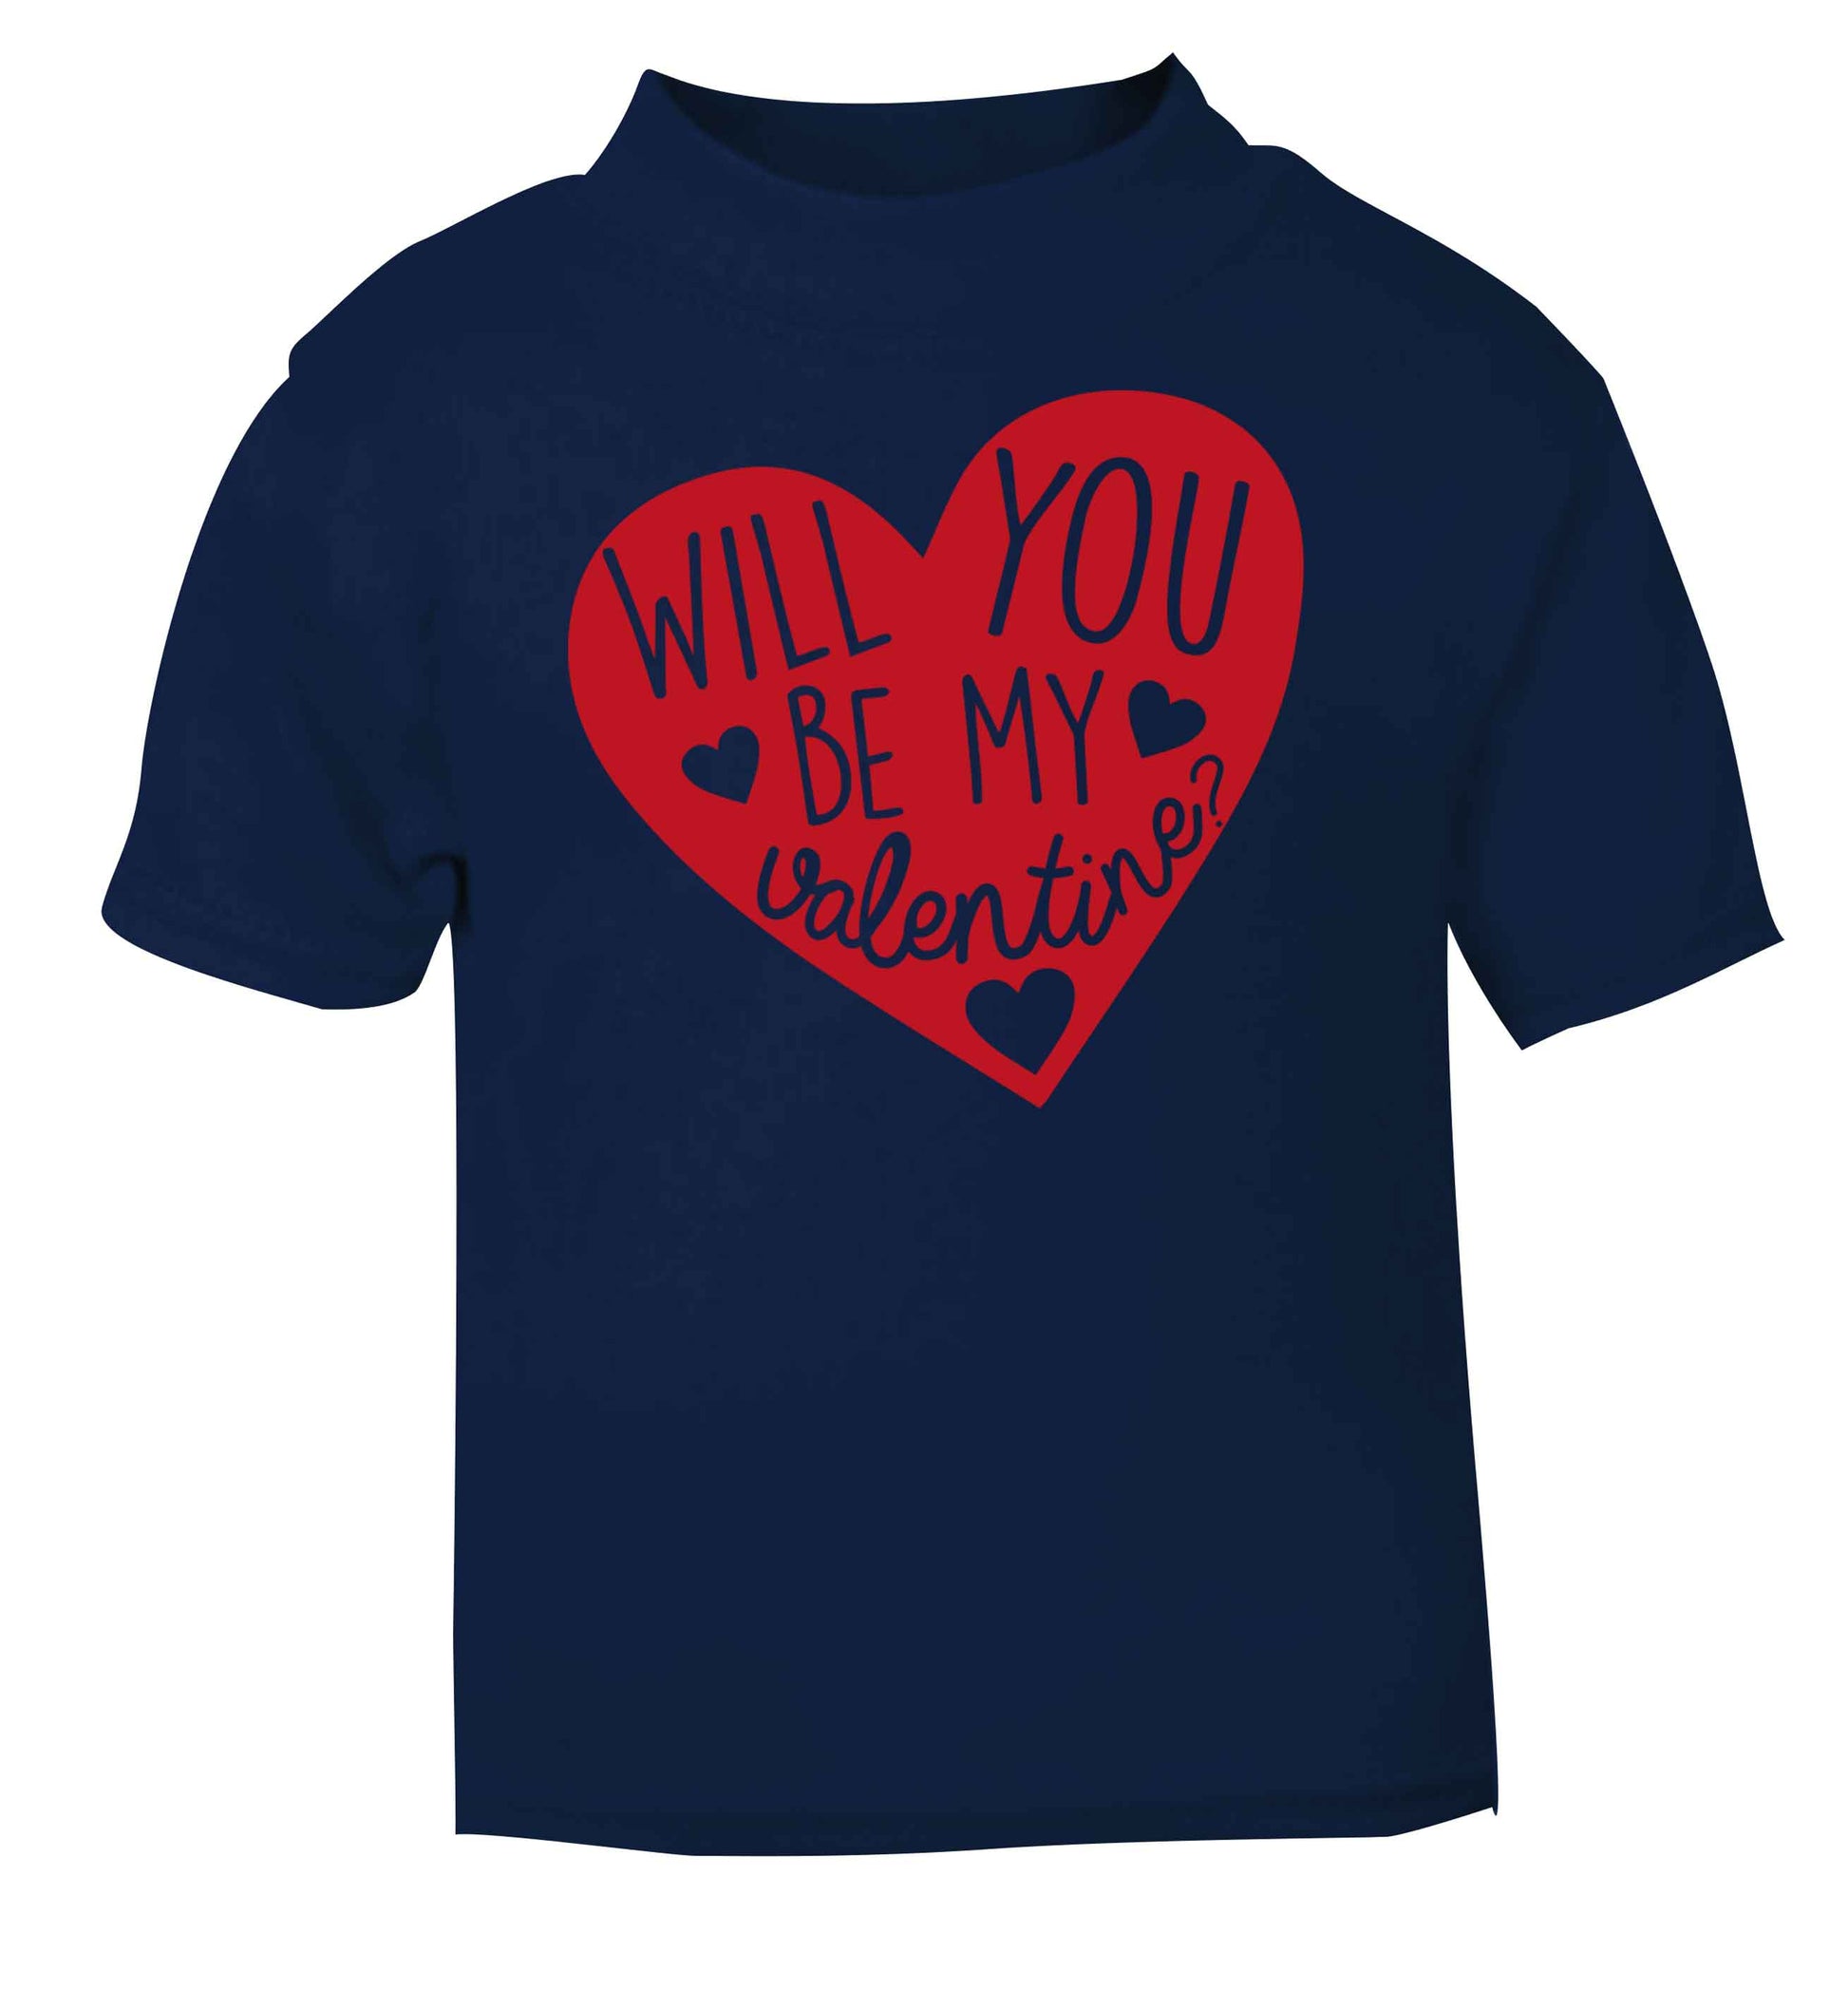 Will you be my valentine? navy baby toddler Tshirt 2 Years